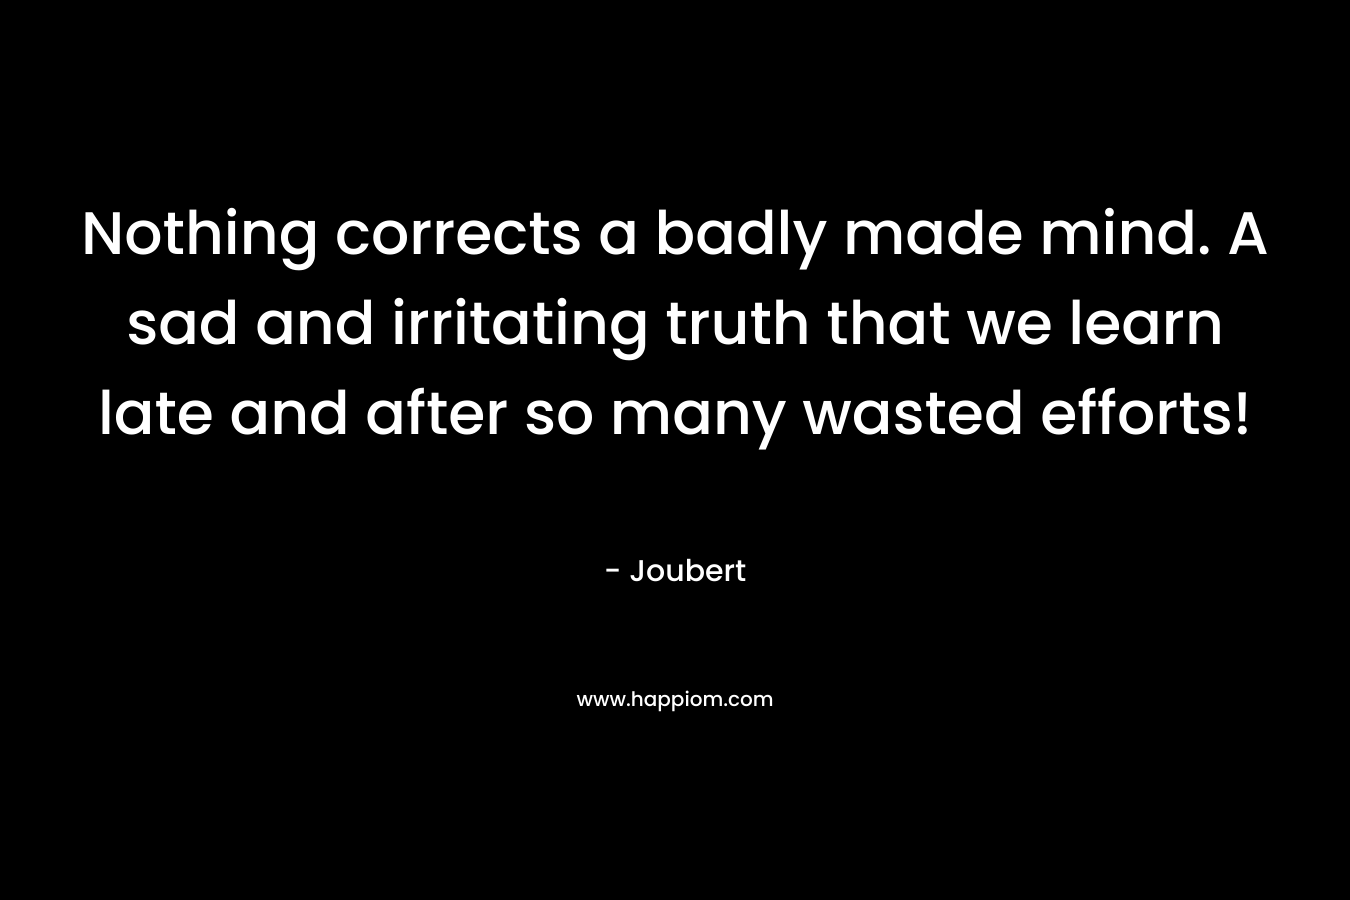 Nothing corrects a badly made mind. A sad and irritating truth that we learn late and after so many wasted efforts! – Joubert